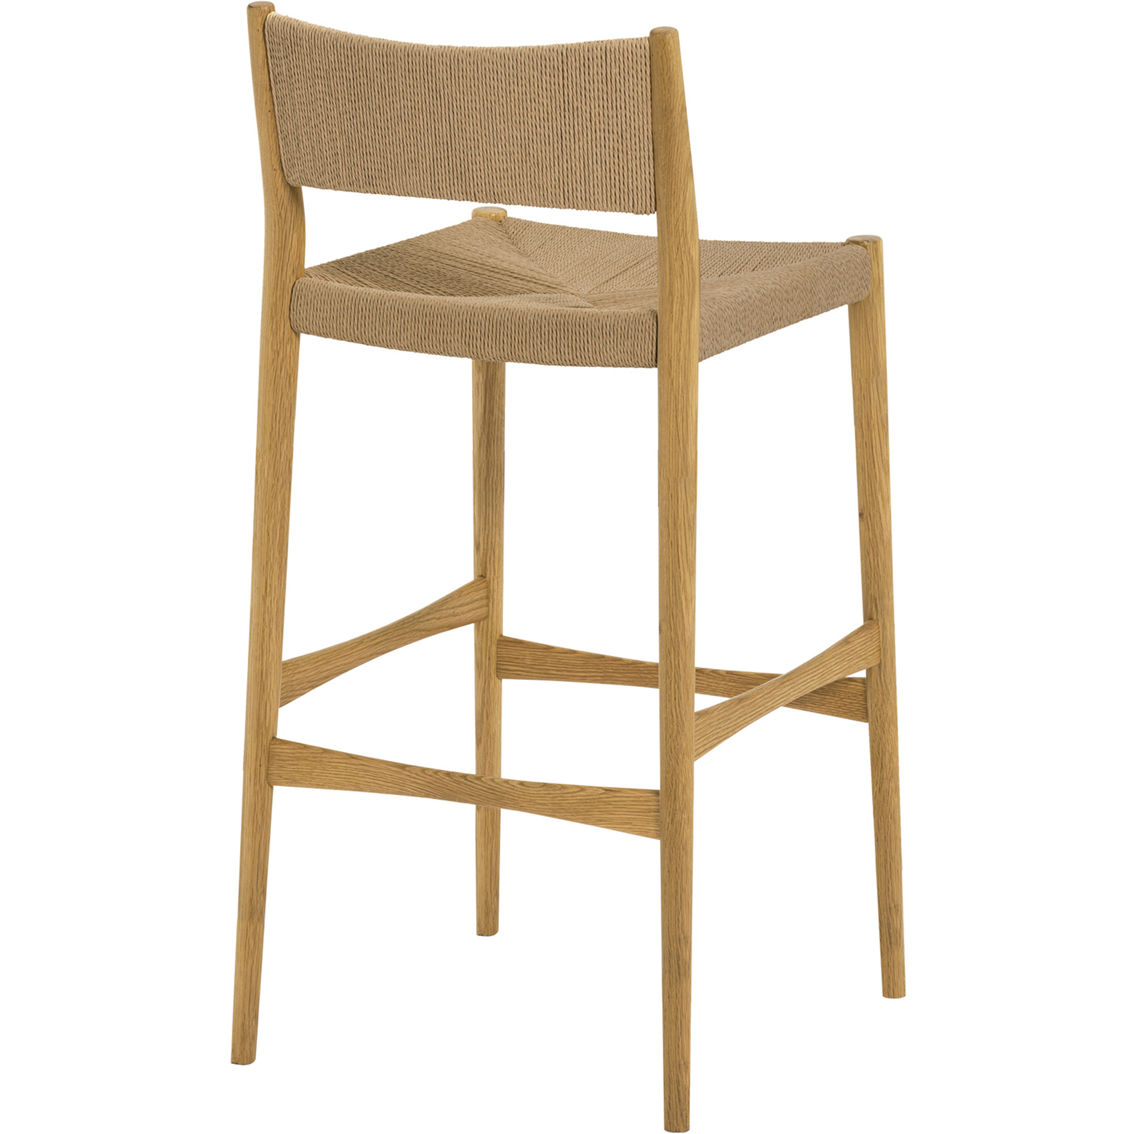 Armen Living Erie Woven Paper Cord and Oak Wood Barstool - Image 2 of 10